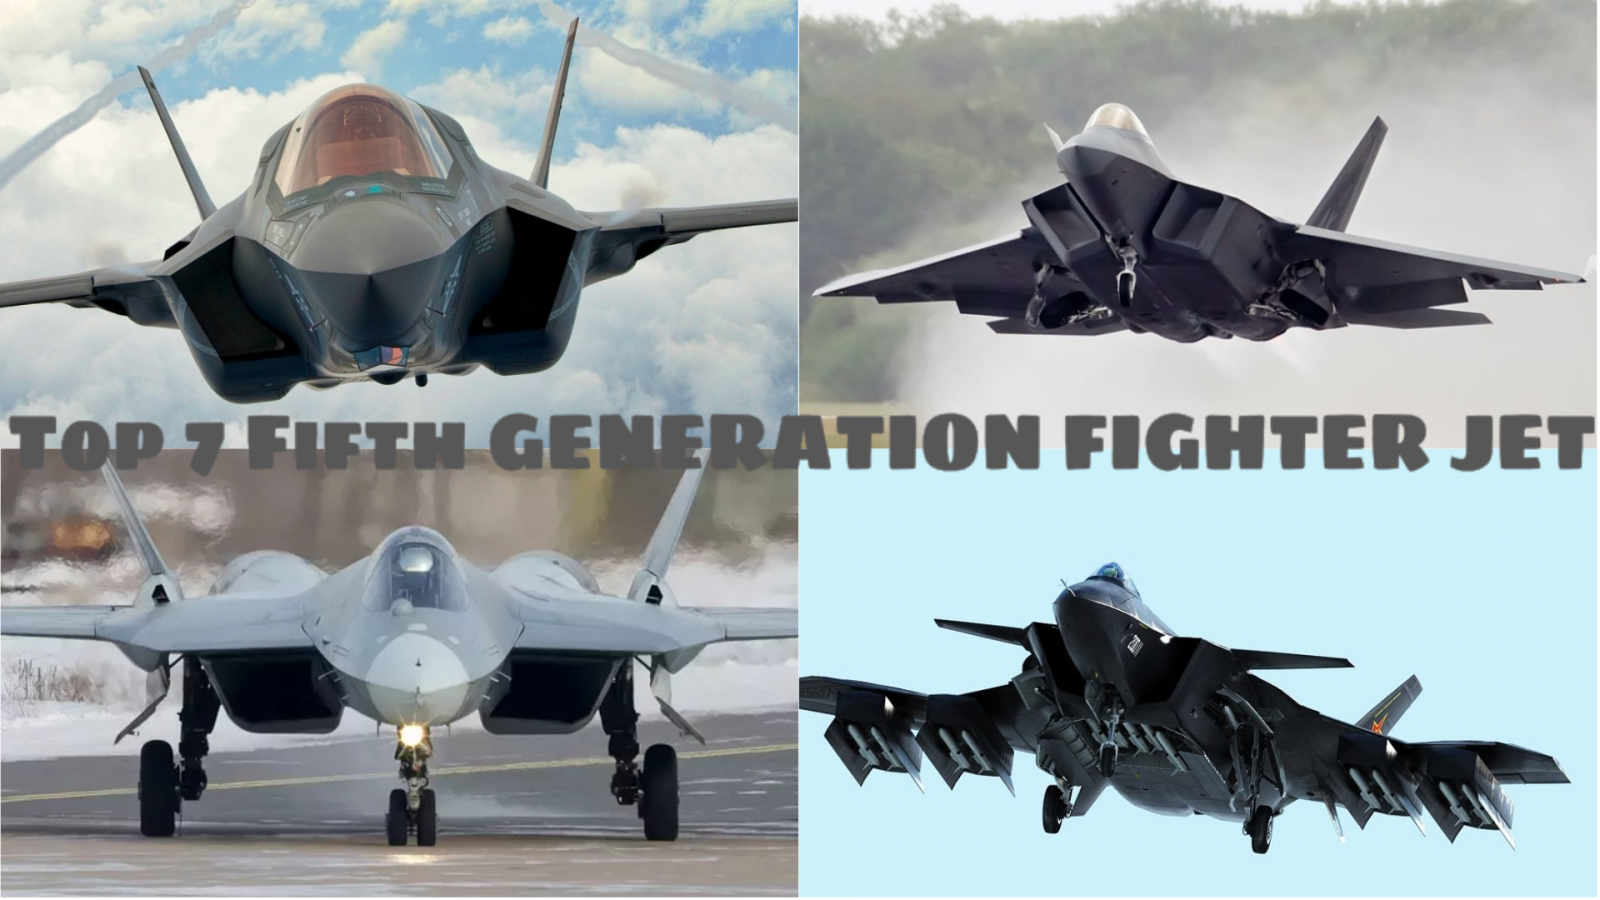 Top 7 Fifth Generation Fighter Jet In The World